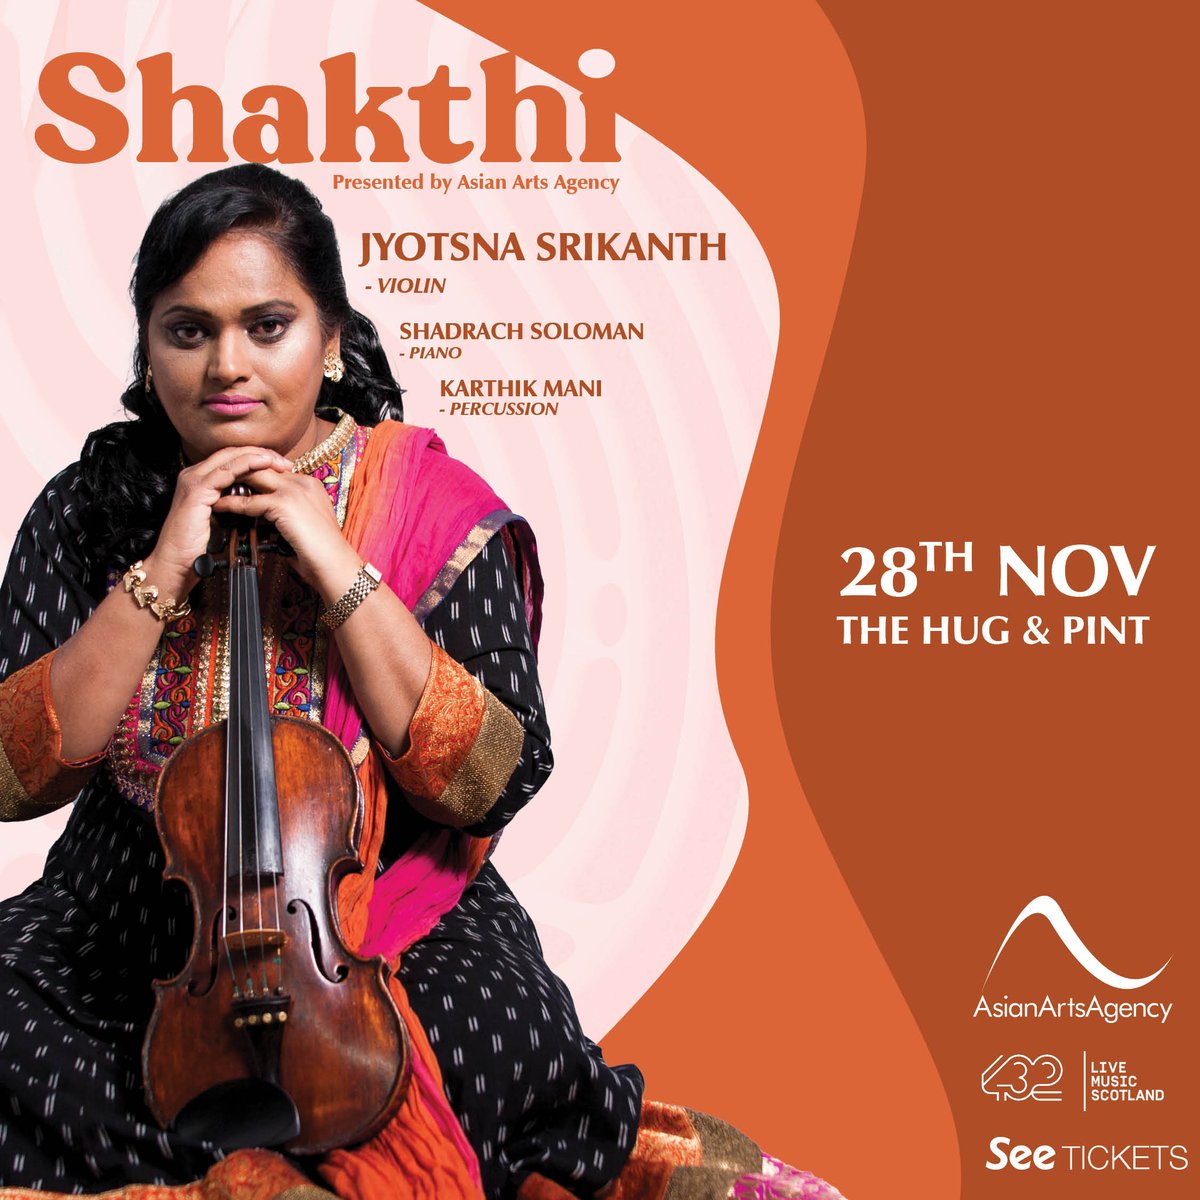 Join us for a night with Europe's foremost violinist @violinjyotsna 's brand new trio project, Shakthi. They play @thehugandpint on the 28th November 2022 Buy tickets here ! - bit.ly/3Tc5wyD